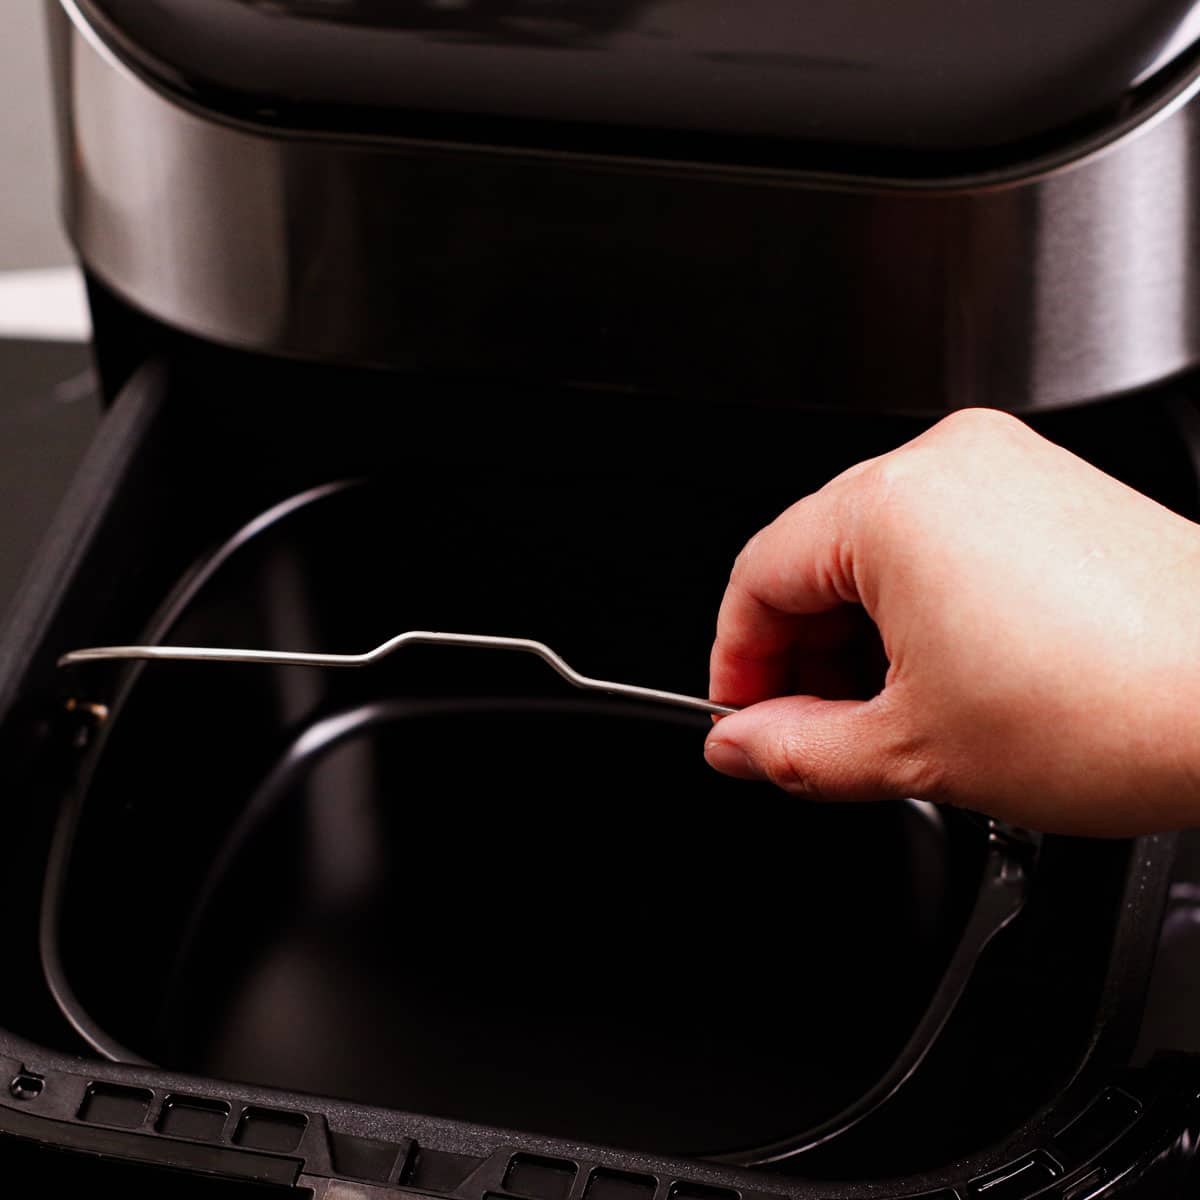 Preheating air fryer with frying pan accessory